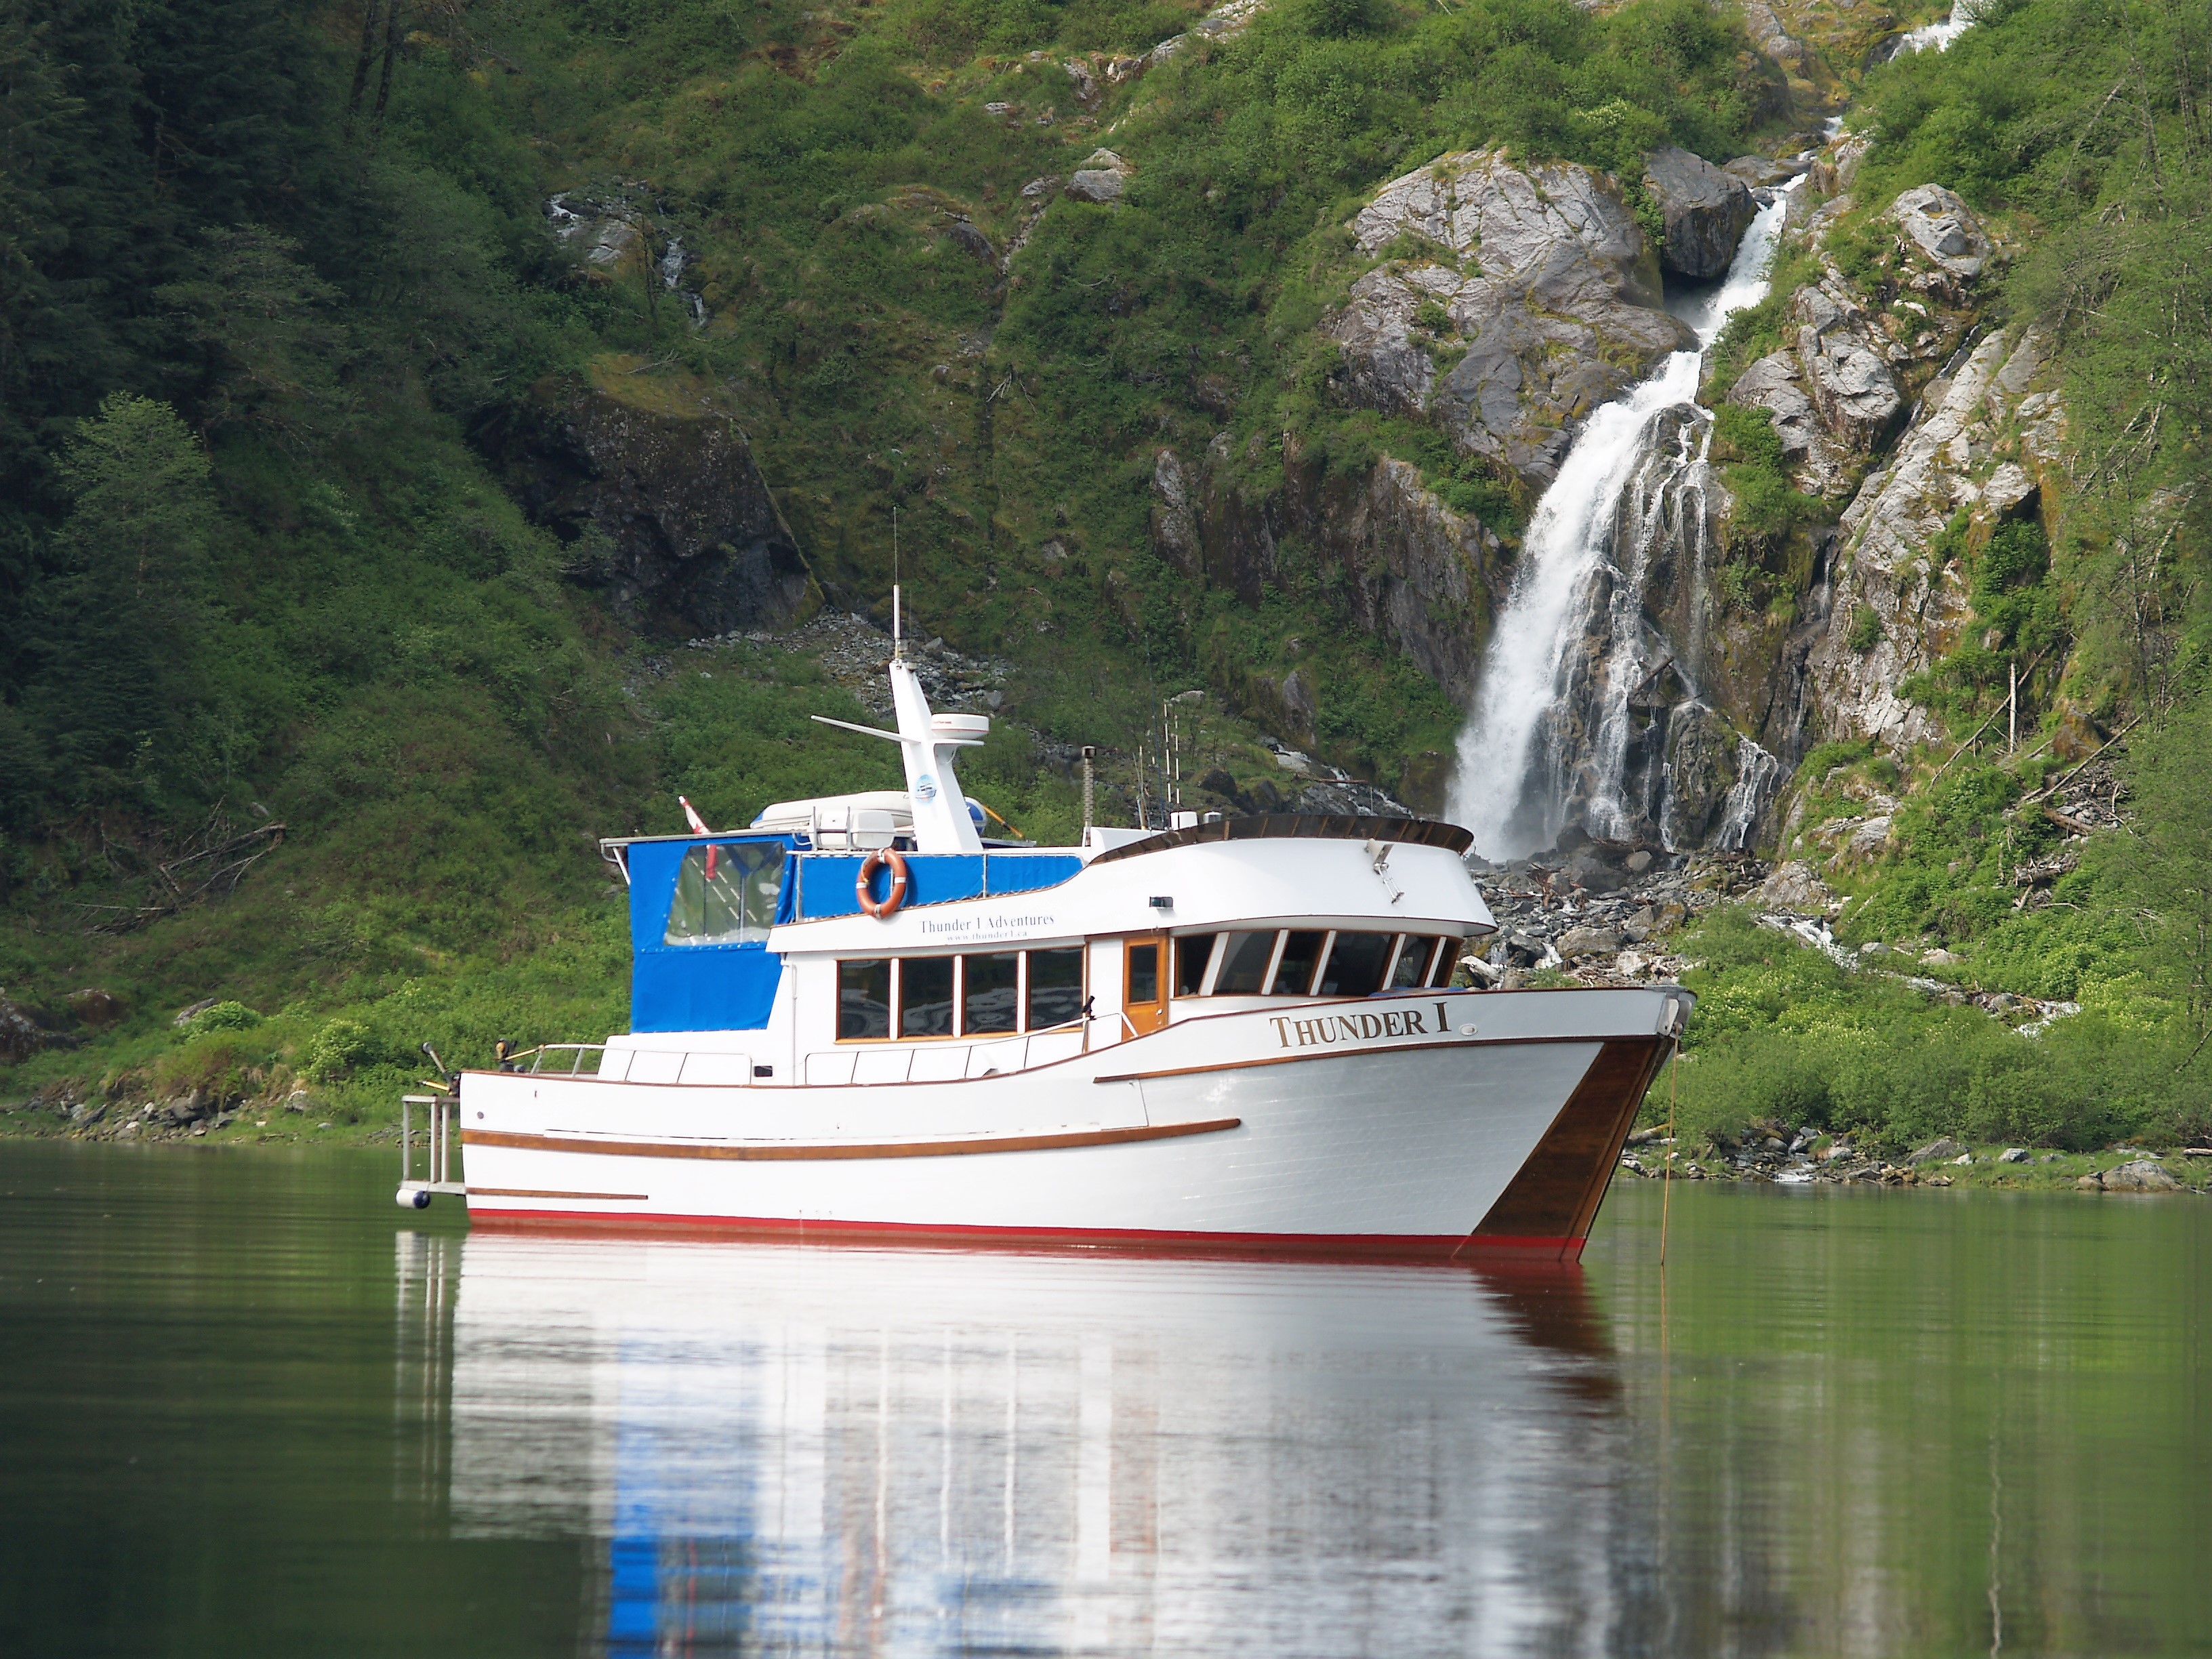 1984 52 foot Other Trawler Power boat for sale in British Columbia, Canada - image 3 